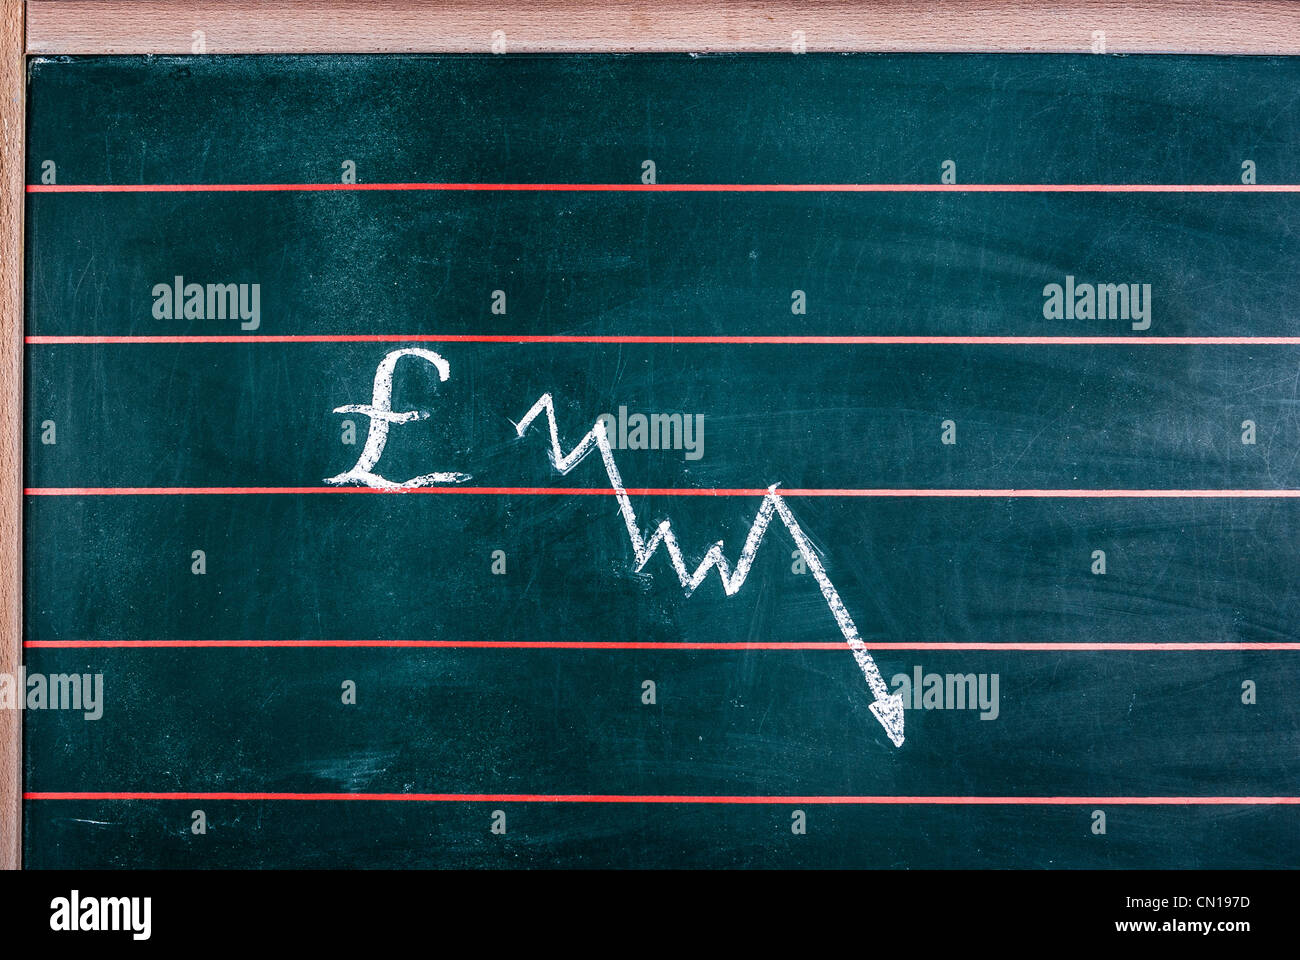 The british pound sign as well as a downward curve graph sketched on a blackboard Stock Photo